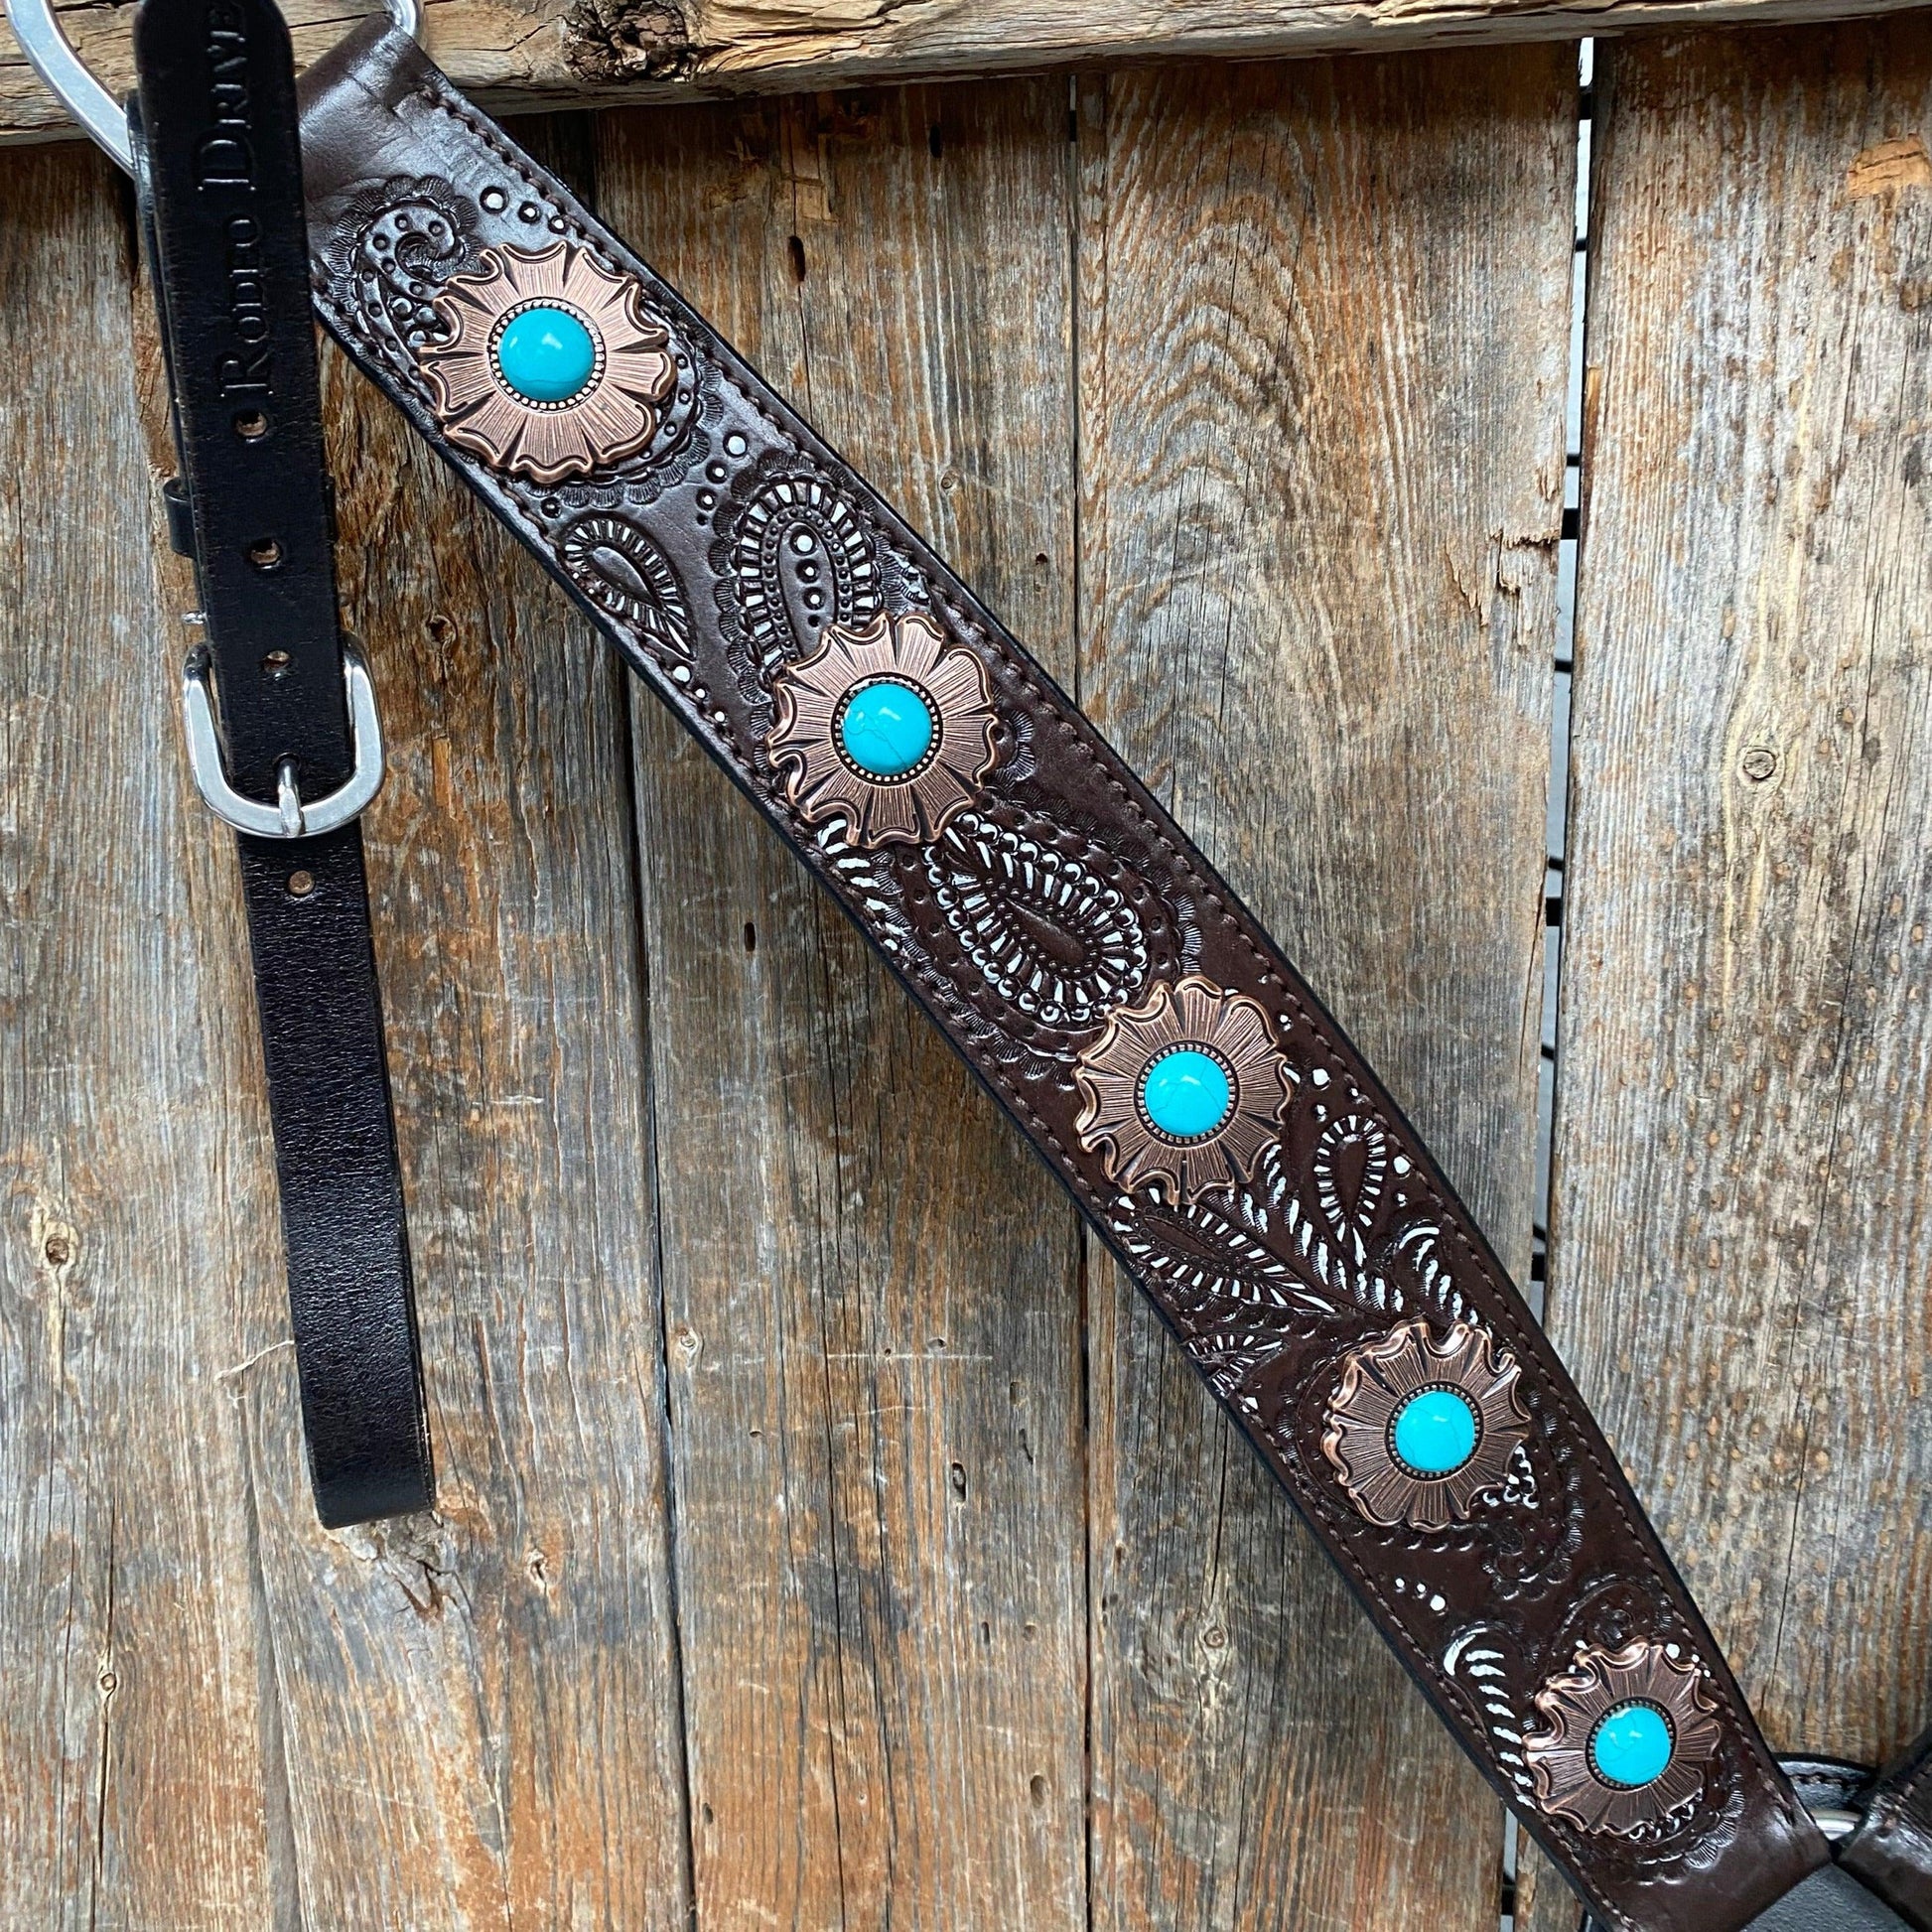 Paisley Copper and Turquoise One Ear/ Breastcollar #OEBC541 - RODEO DRIVE